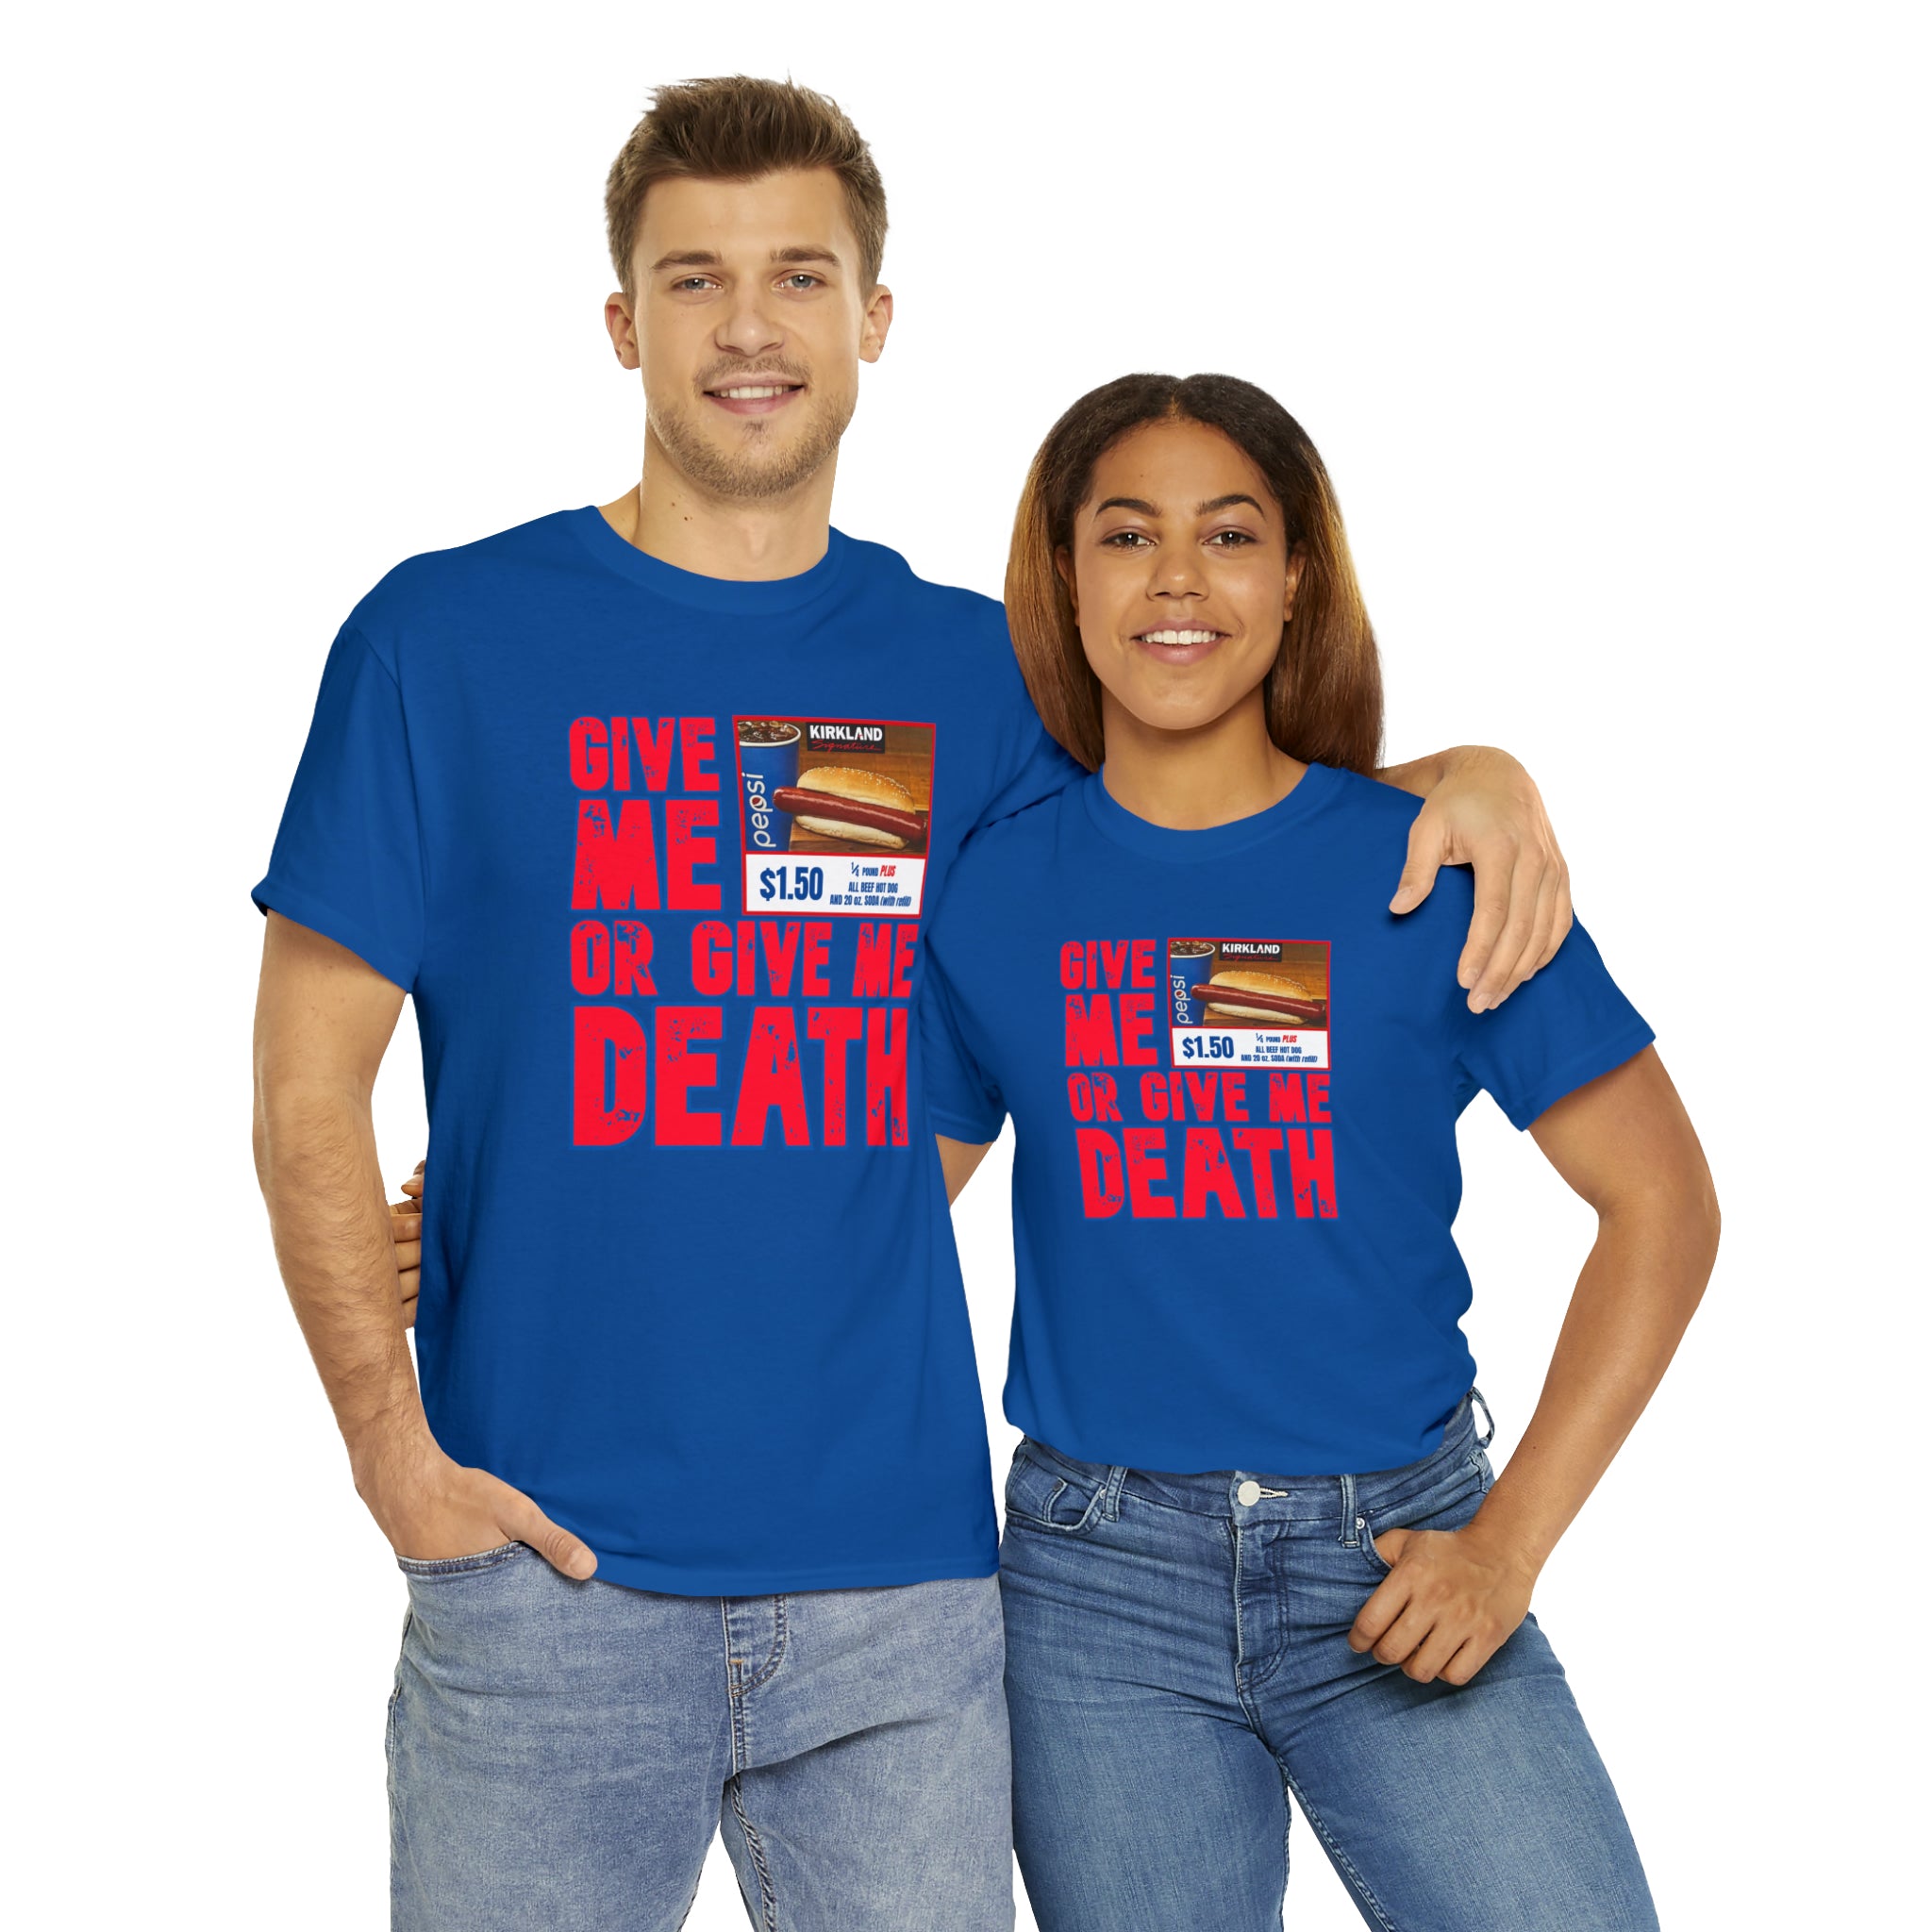 Give me costco $1.50 hotdog or give me death - Unisex Heavy Cotton Tee